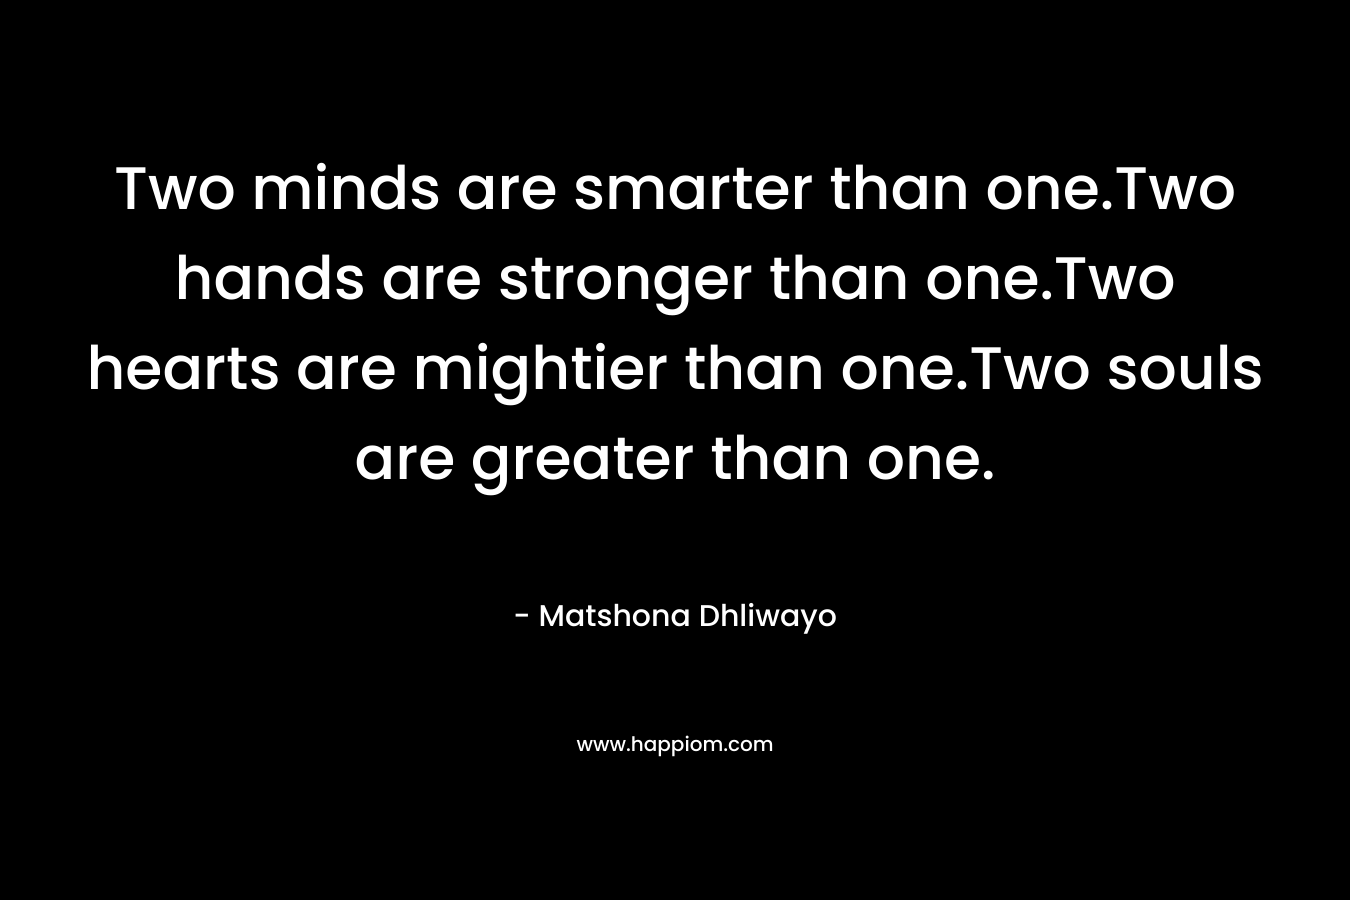 Two minds are smarter than one.Two hands are stronger than one.Two hearts are mightier than one.Two souls are greater than one.